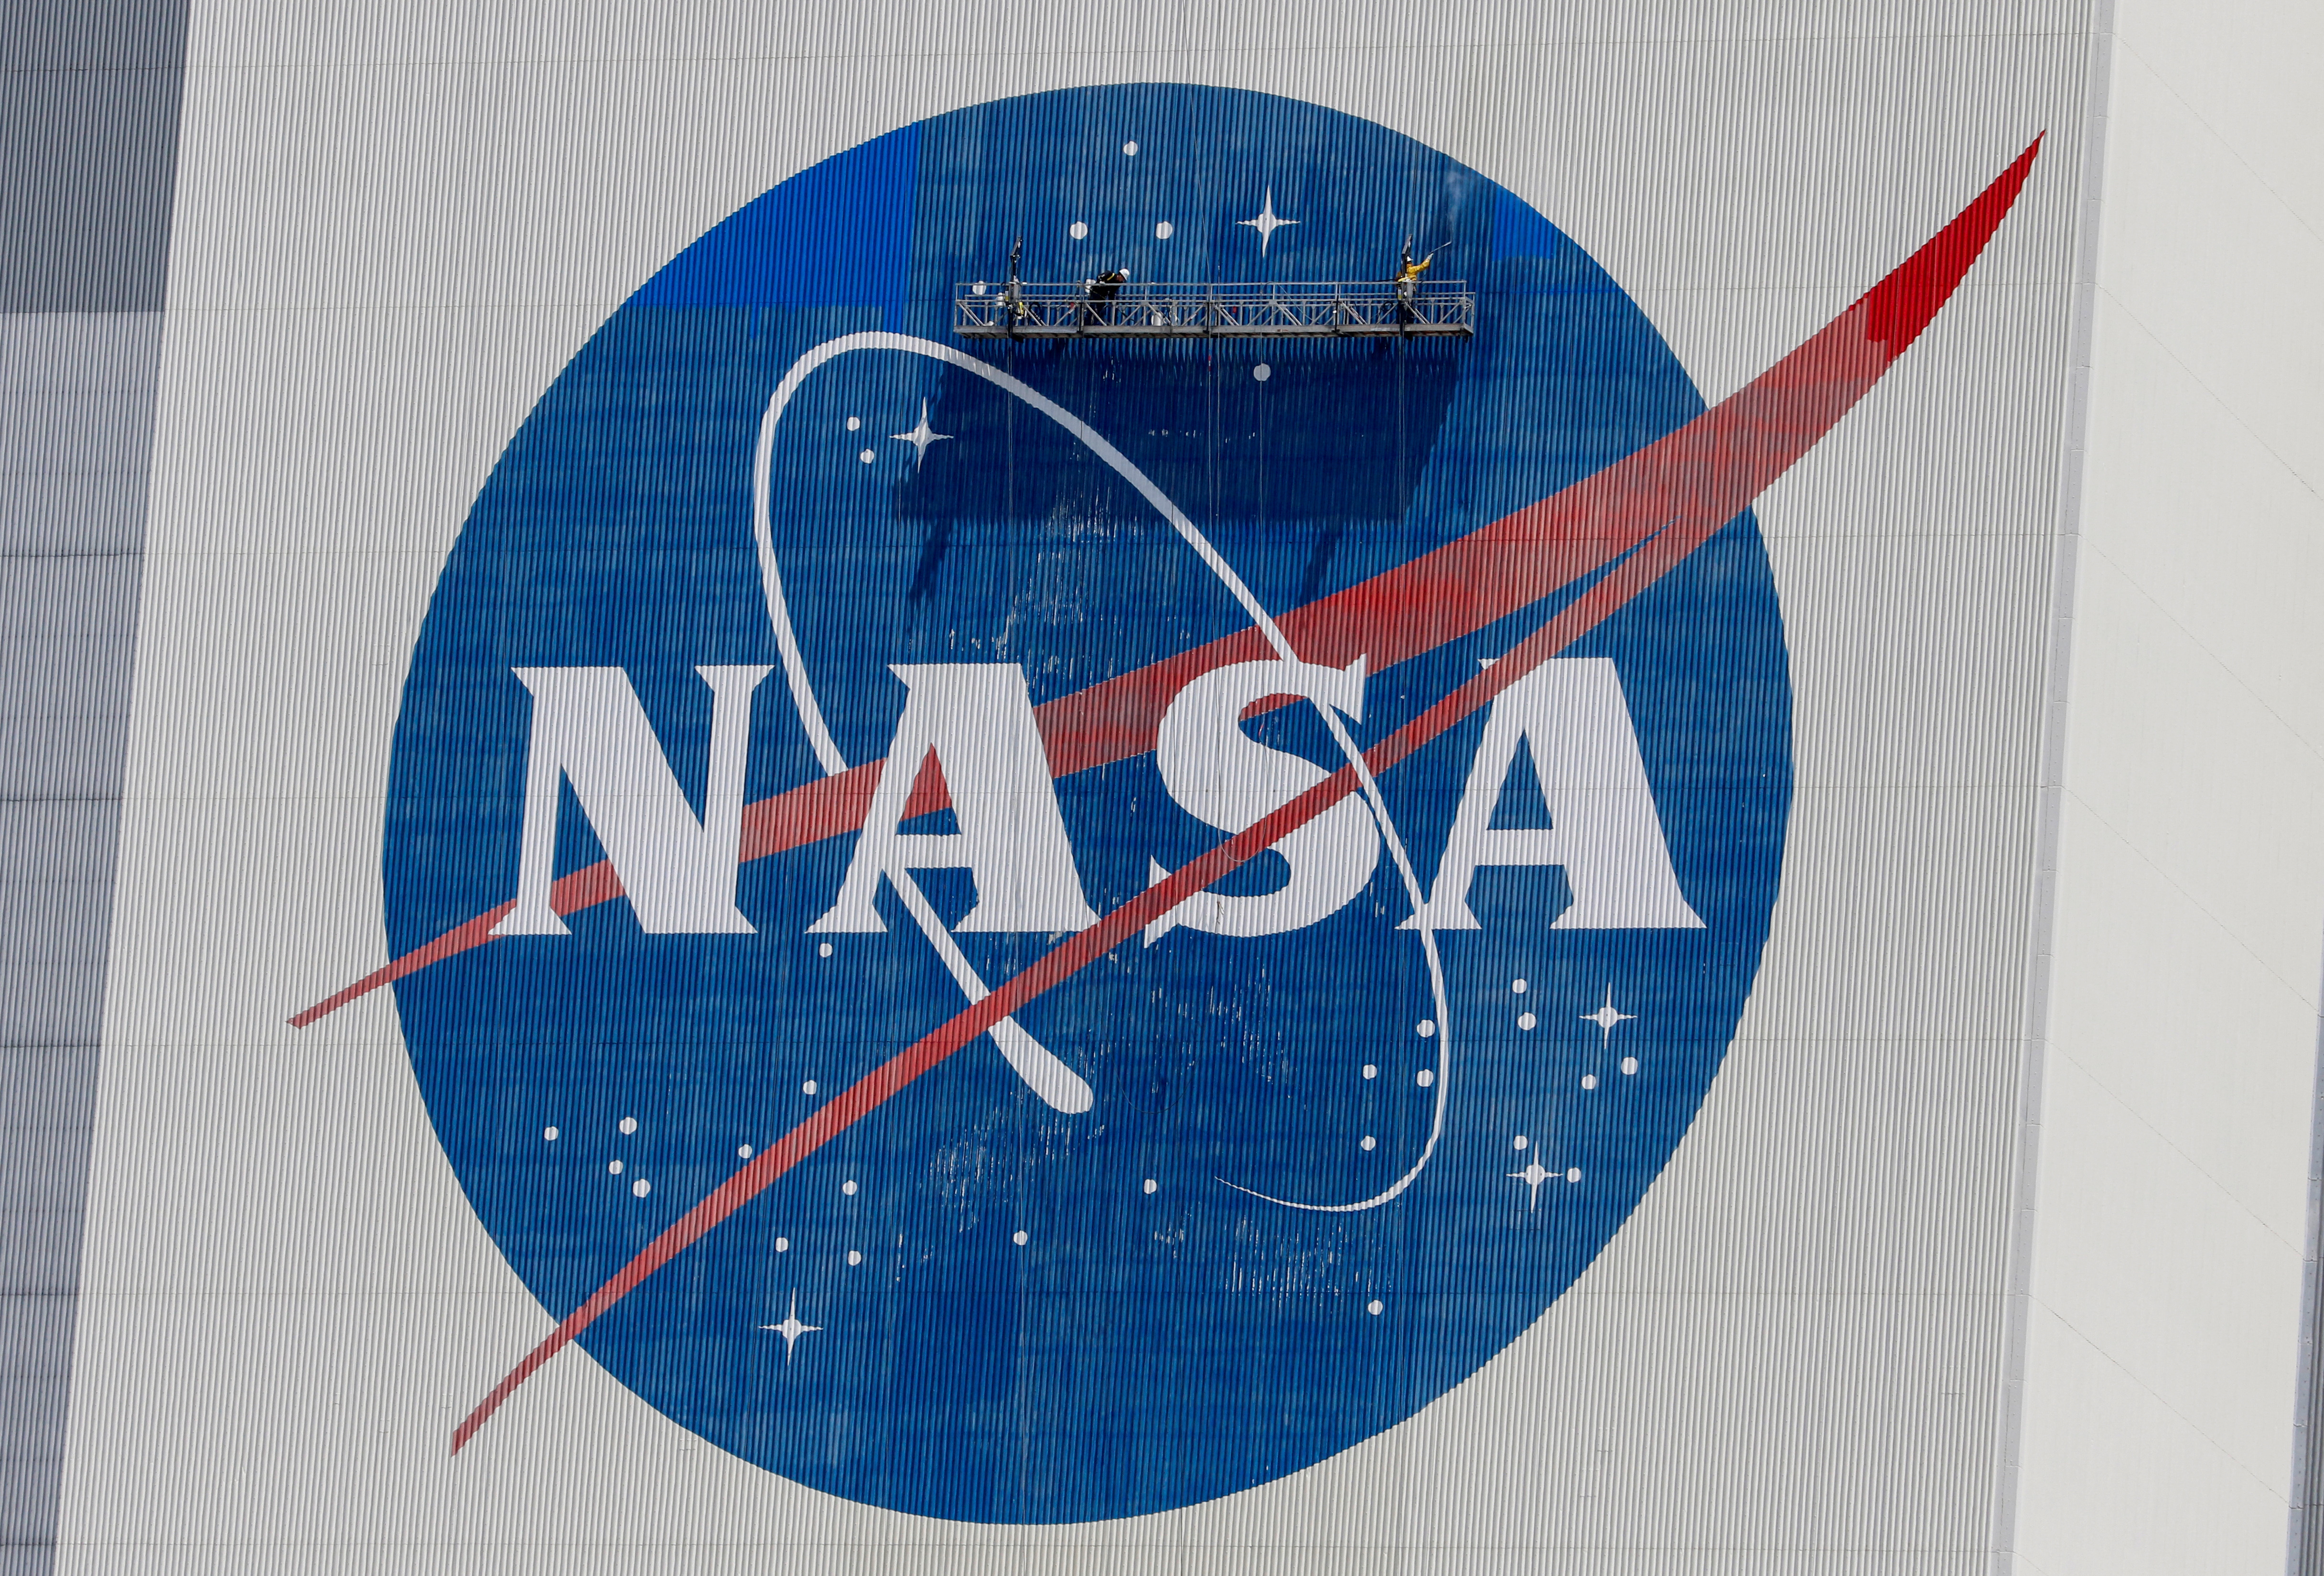 Workers pressure wash the logo of NASA on the Vehicle Assembly Building, in Cape Canaveral